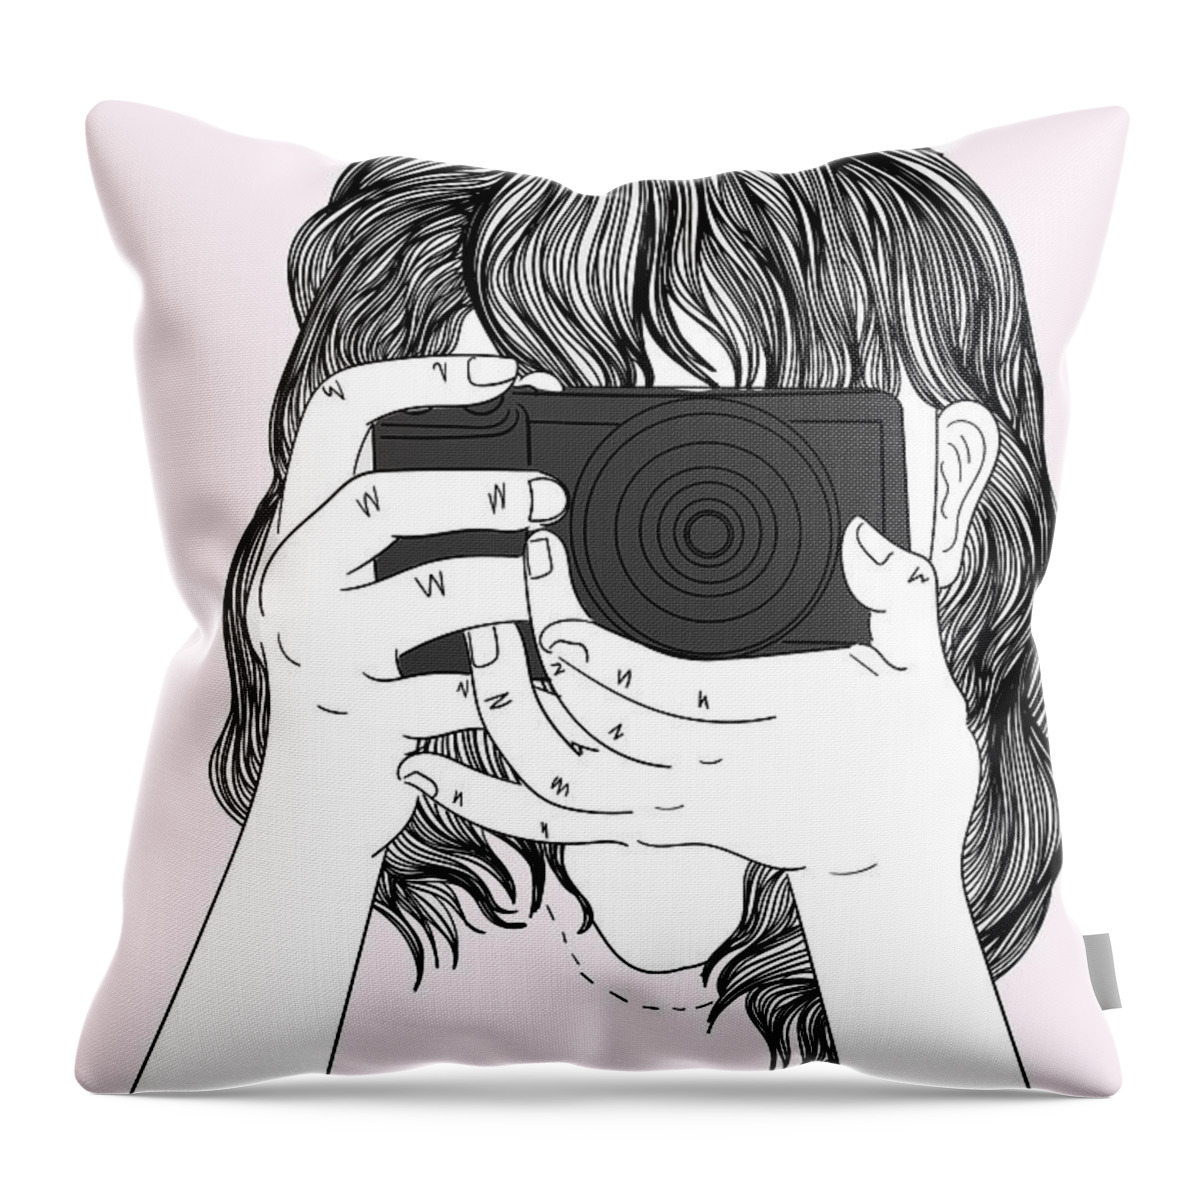 Graphic Throw Pillow featuring the digital art Woman With A Camera - Line Art Graphic Illustration Artwork by Sambel Pedes